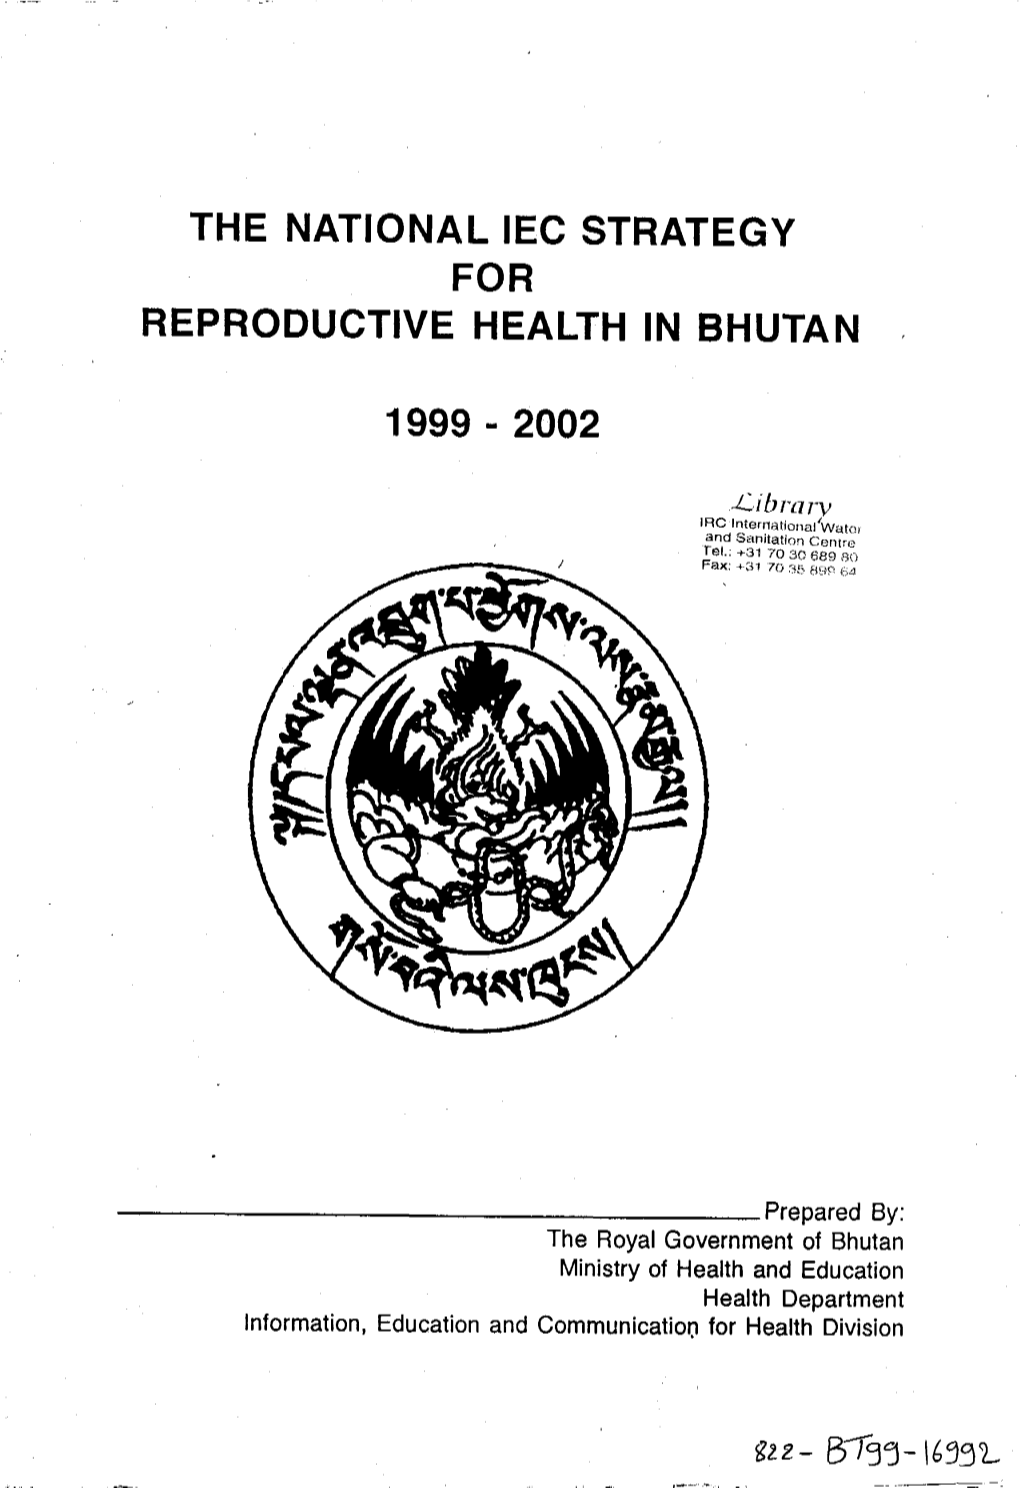 The National Iec Strategy for Reproductive Health in Bhutan